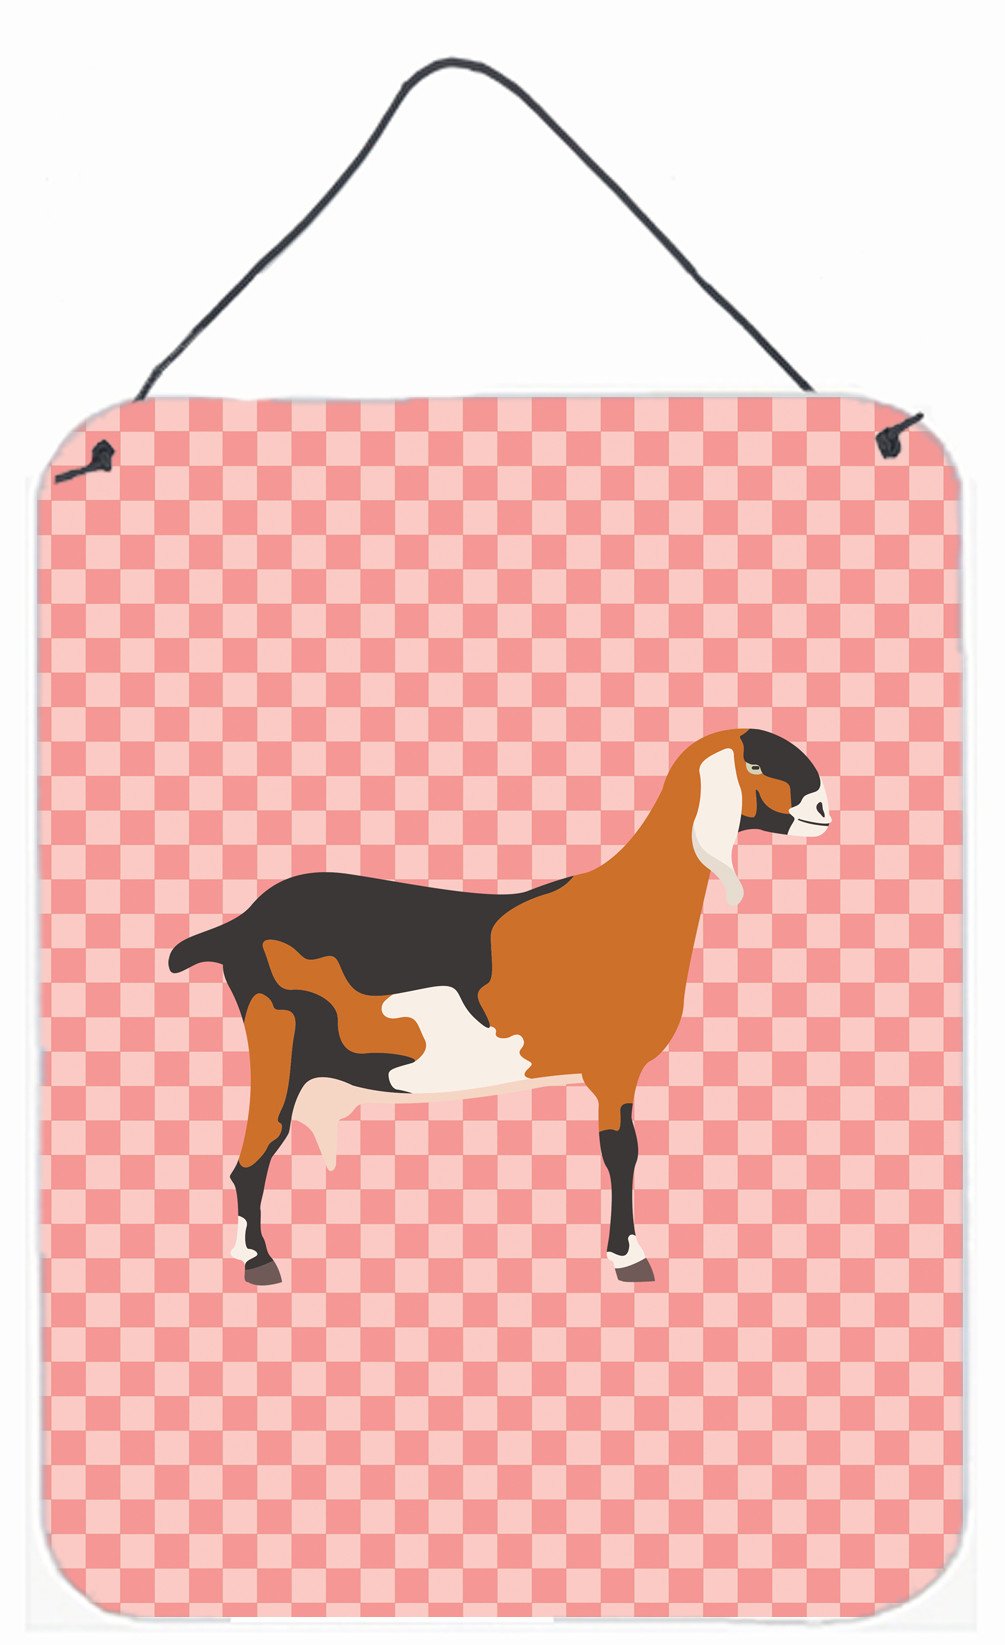 Anglo-nubian Nubian Goat Pink Check Wall or Door Hanging Prints BB7883DS1216 by Caroline's Treasures